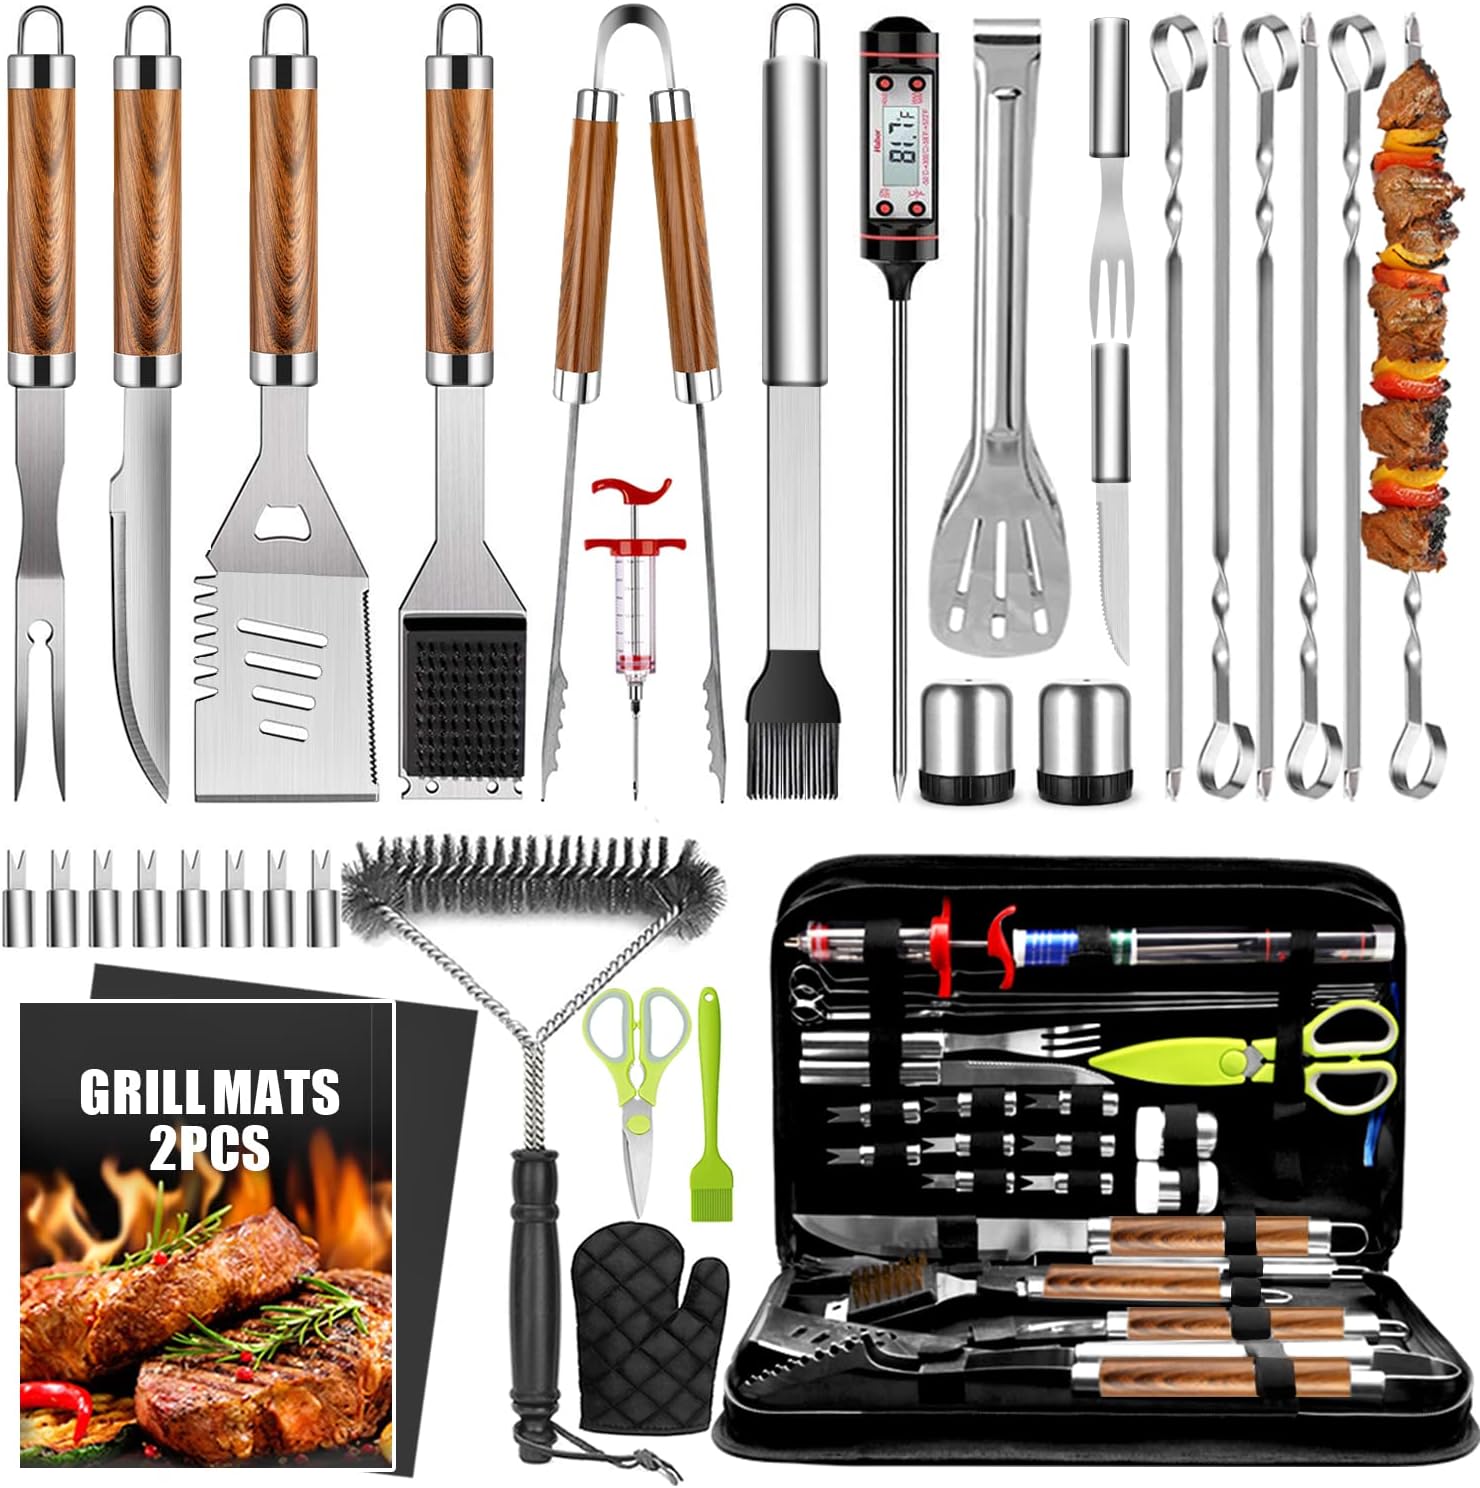 34Pcs Grill Accessories Grilling Gifts for Men, 16 Inches Heavy Duty BBQ Accessories, Stainless Steel Grill Tools with Thermometer, Grill Mats for Backyard, BBQ Gifts Set for Father's Day - image 1 of 7